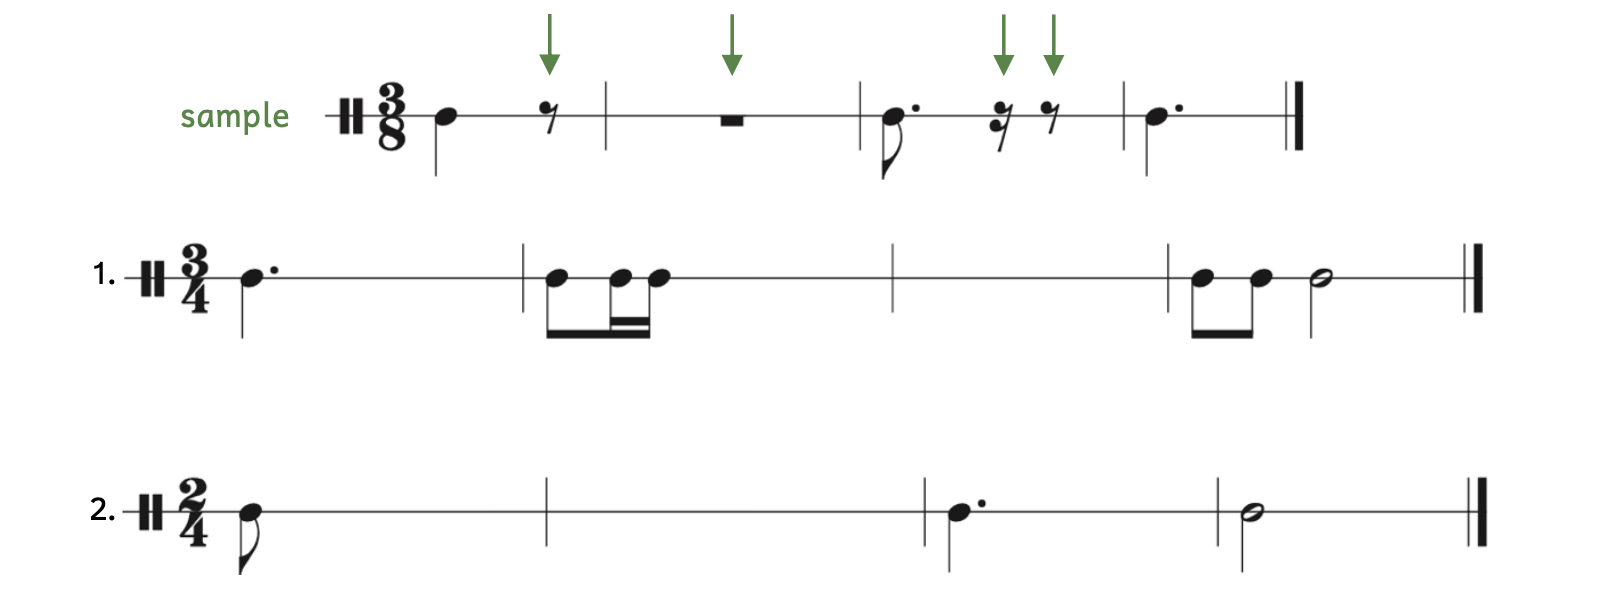 Exercises adding rests to complete each measure. The sample is in 3-8. The first measure has a quarter note and an eighth rest has been added to complete the measure. The second measure was empty and a whole rest has been added to complete the measure. The third measure has a dotted eighth note and a sixteenth rest and eighth rest have been added to complete the measure. Measure 4 is complete. Number 1 is in 3-4. Measure 1 has a dotted quarter note. Measure 2 has an eighth note beamed to two sixteenth notes. Measure 3 is empty. Measure 4 has two beamed eighth notes and a half note. Number 2 is in 2-4. Measure 1 has an eighth note. Measure 2 is empty. Measure 3 has a dotted quarter note. Measure 4 has a half note.